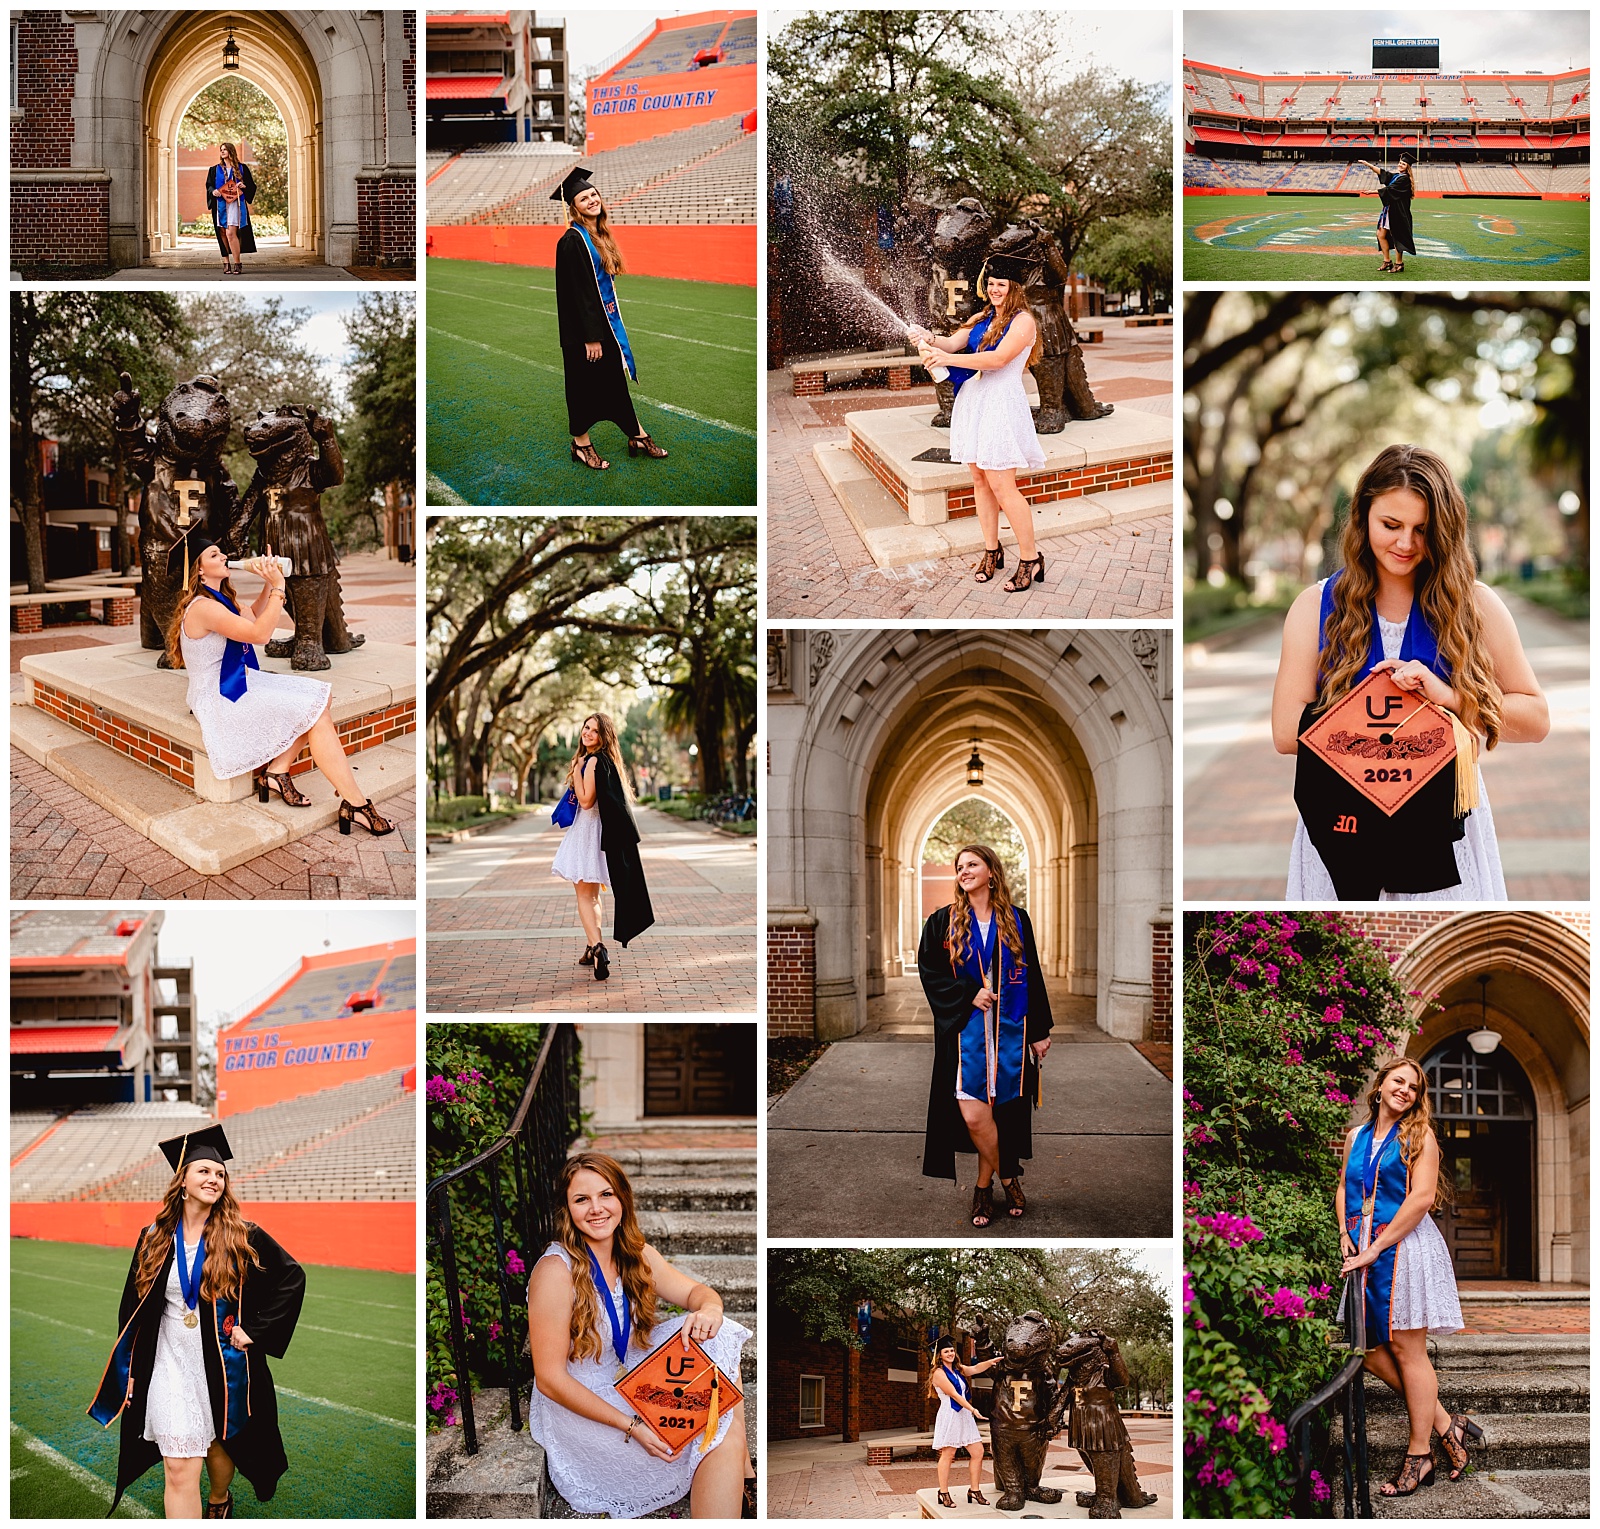 University of Florida graduation pictures by pro photographer near Gainesville, Fl.